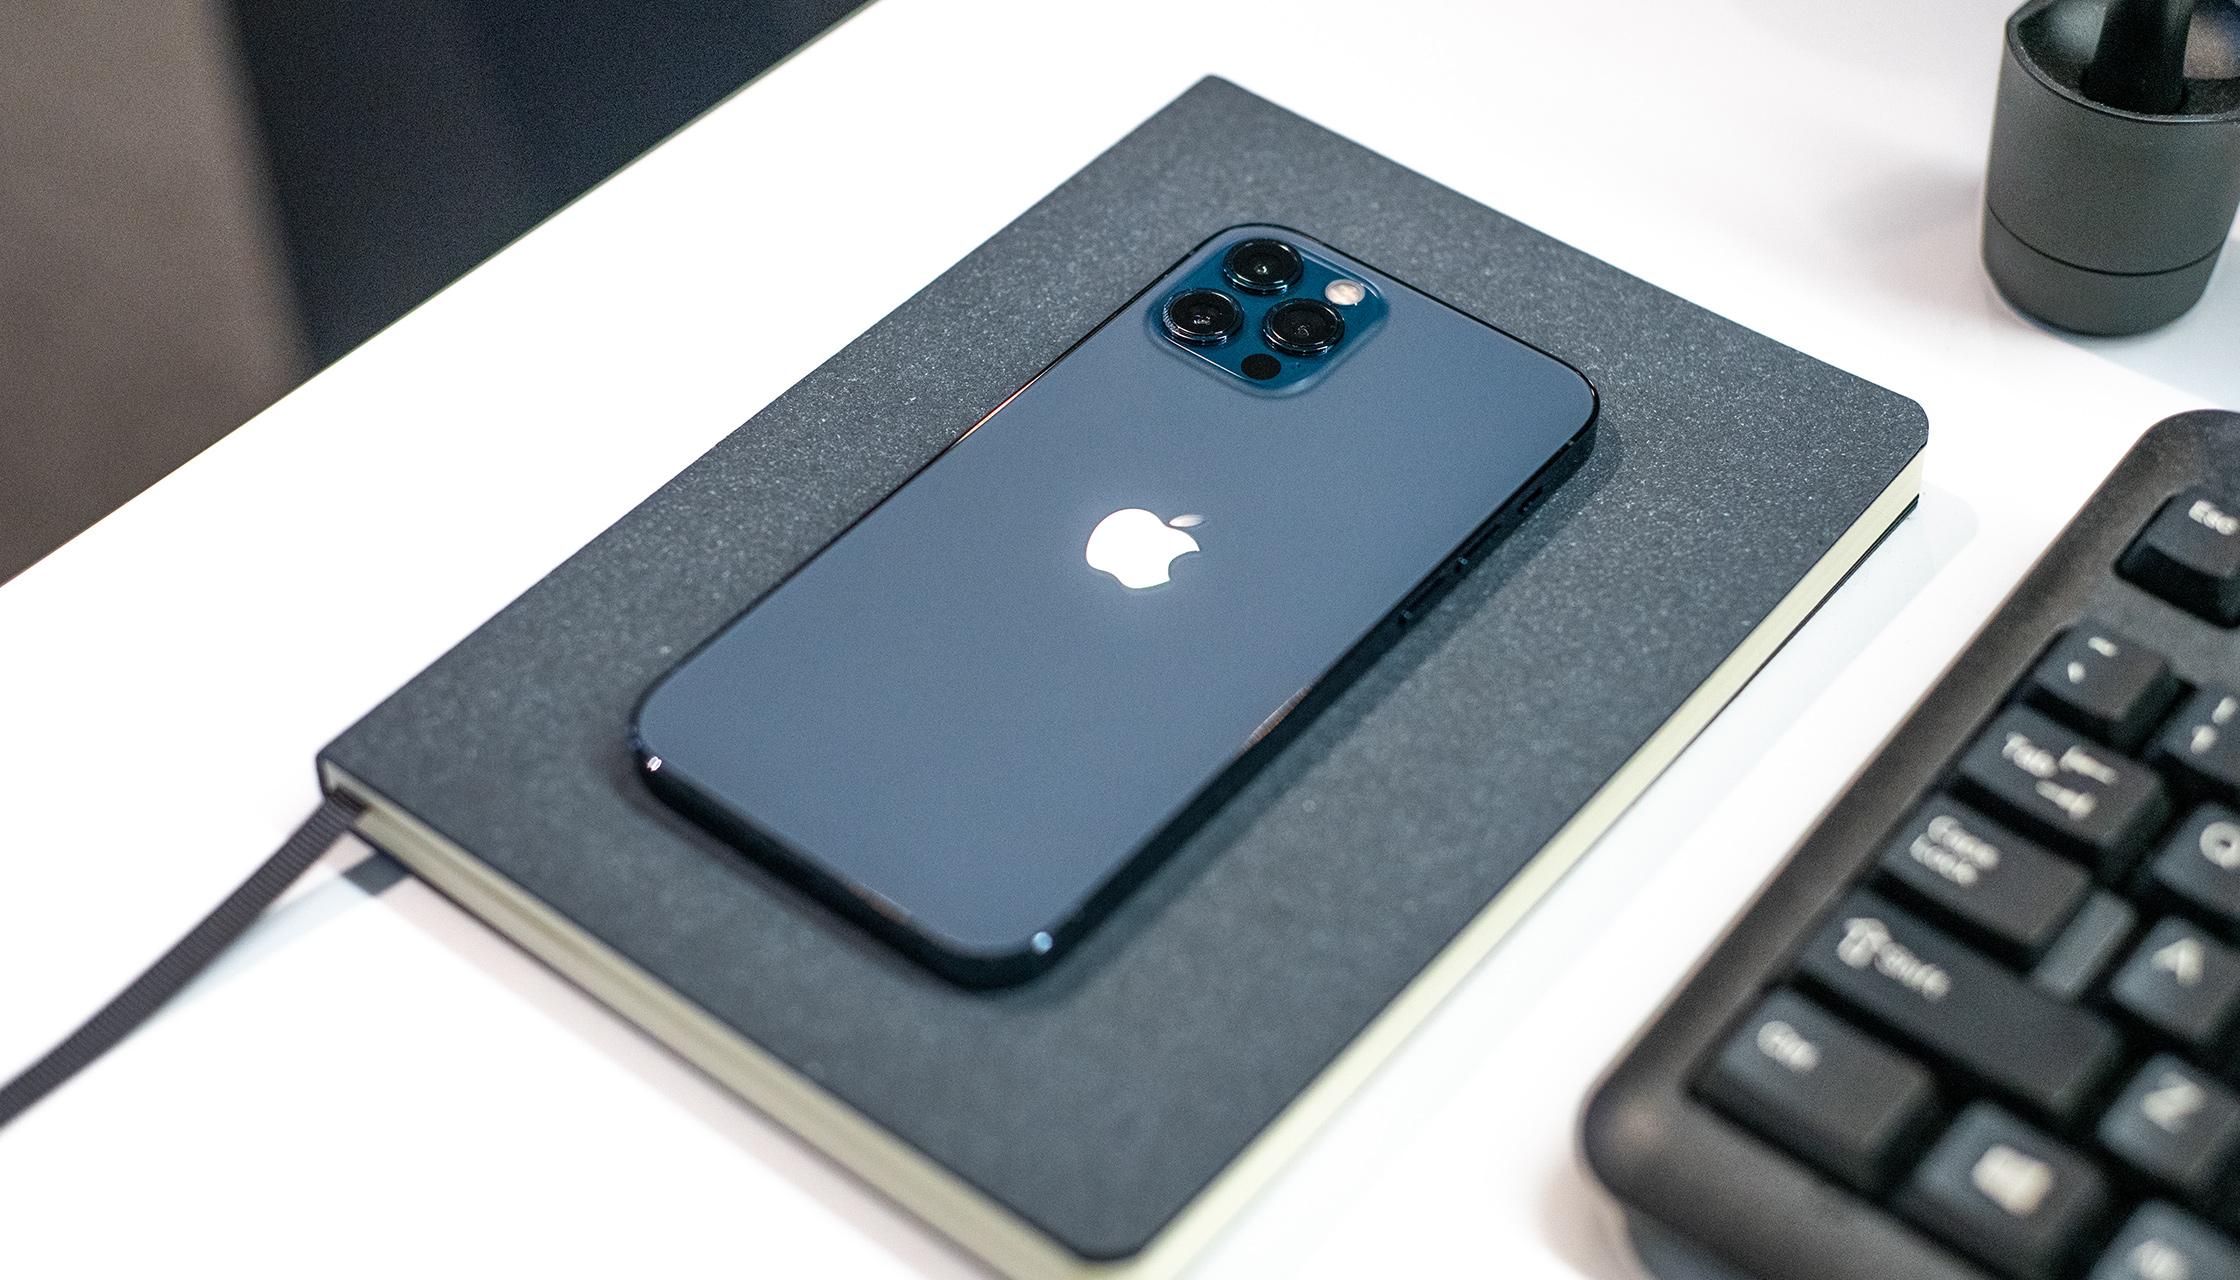 Review: Is it worth upgrading to an iPhone 12 or iPhone 12 Pro?